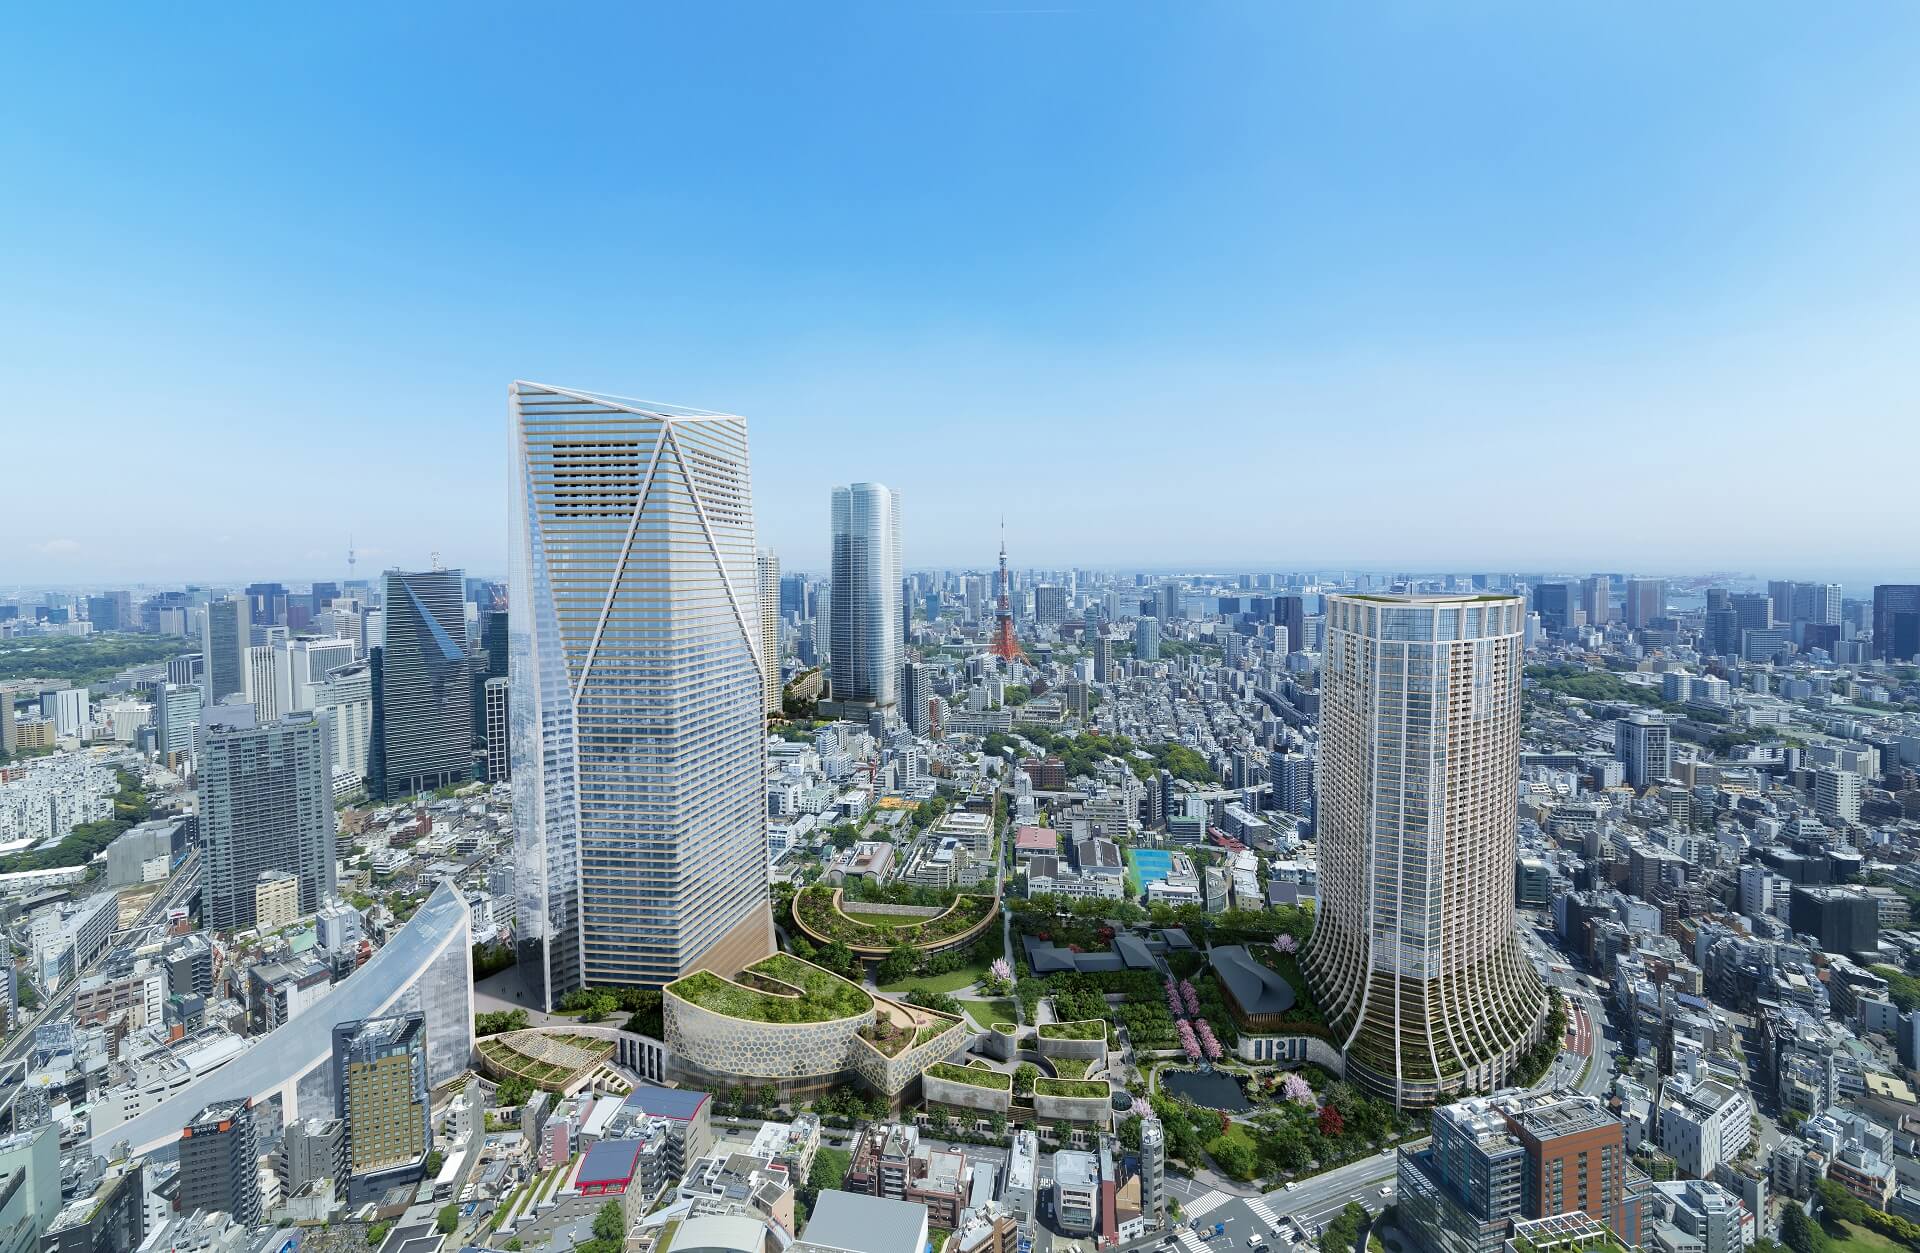 Urban Redevelopment Rendering for a Project in Tokyo